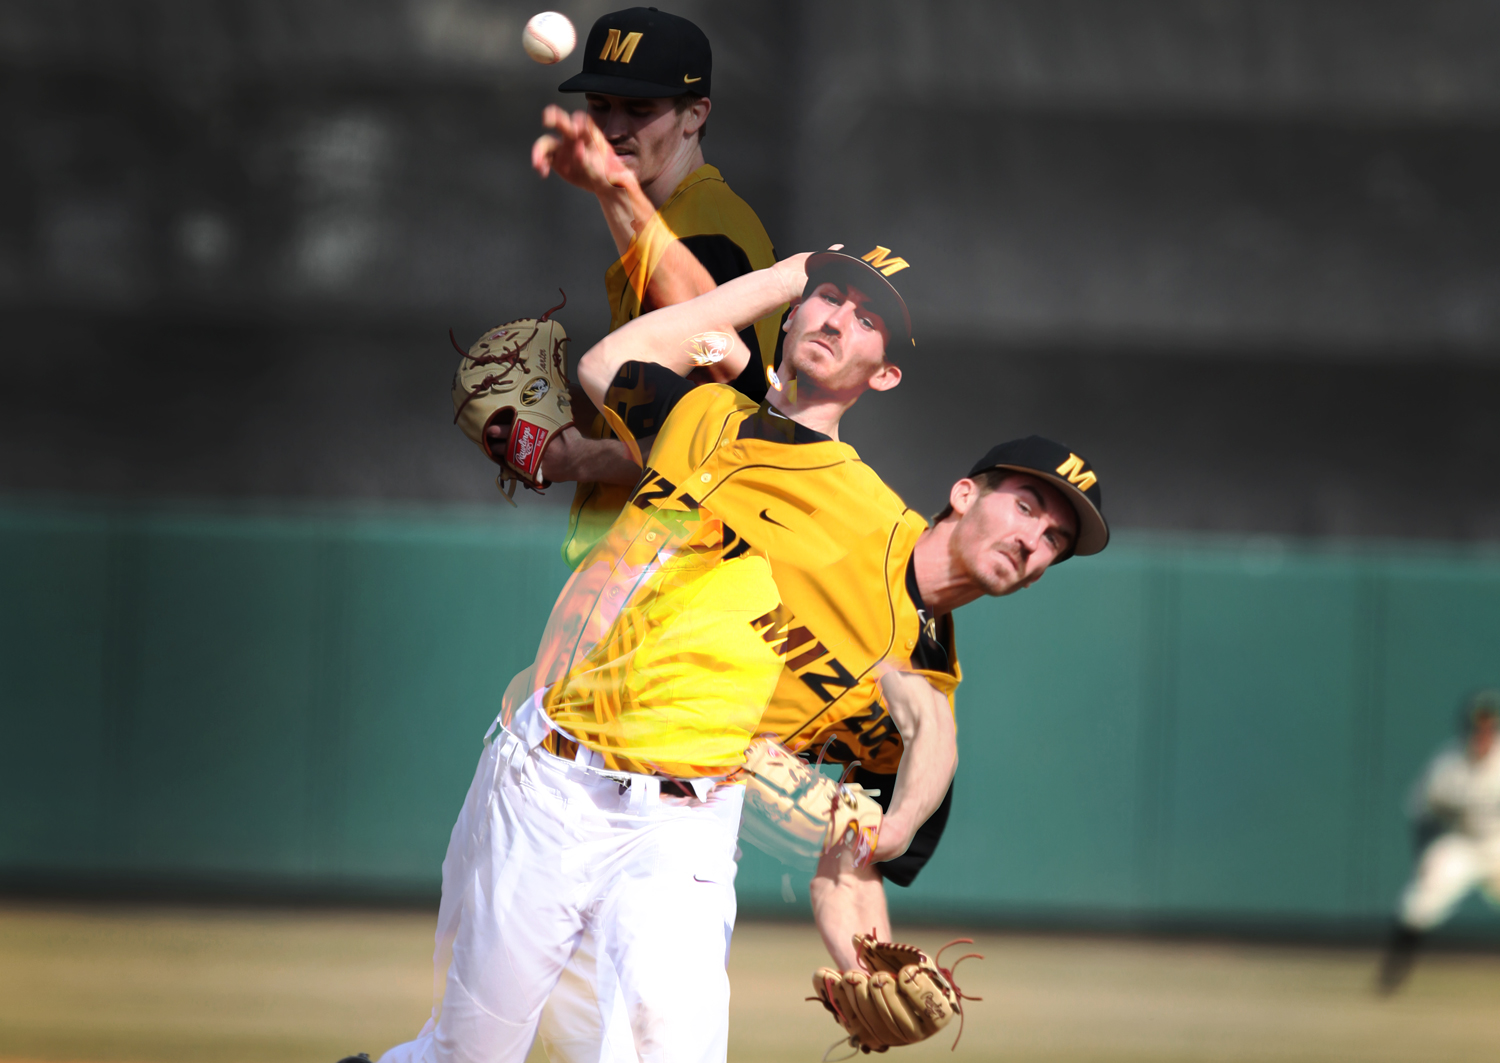 Missouri pitcher Tanner Houck motivated after disappointing end to 2015, Mizzou Sports